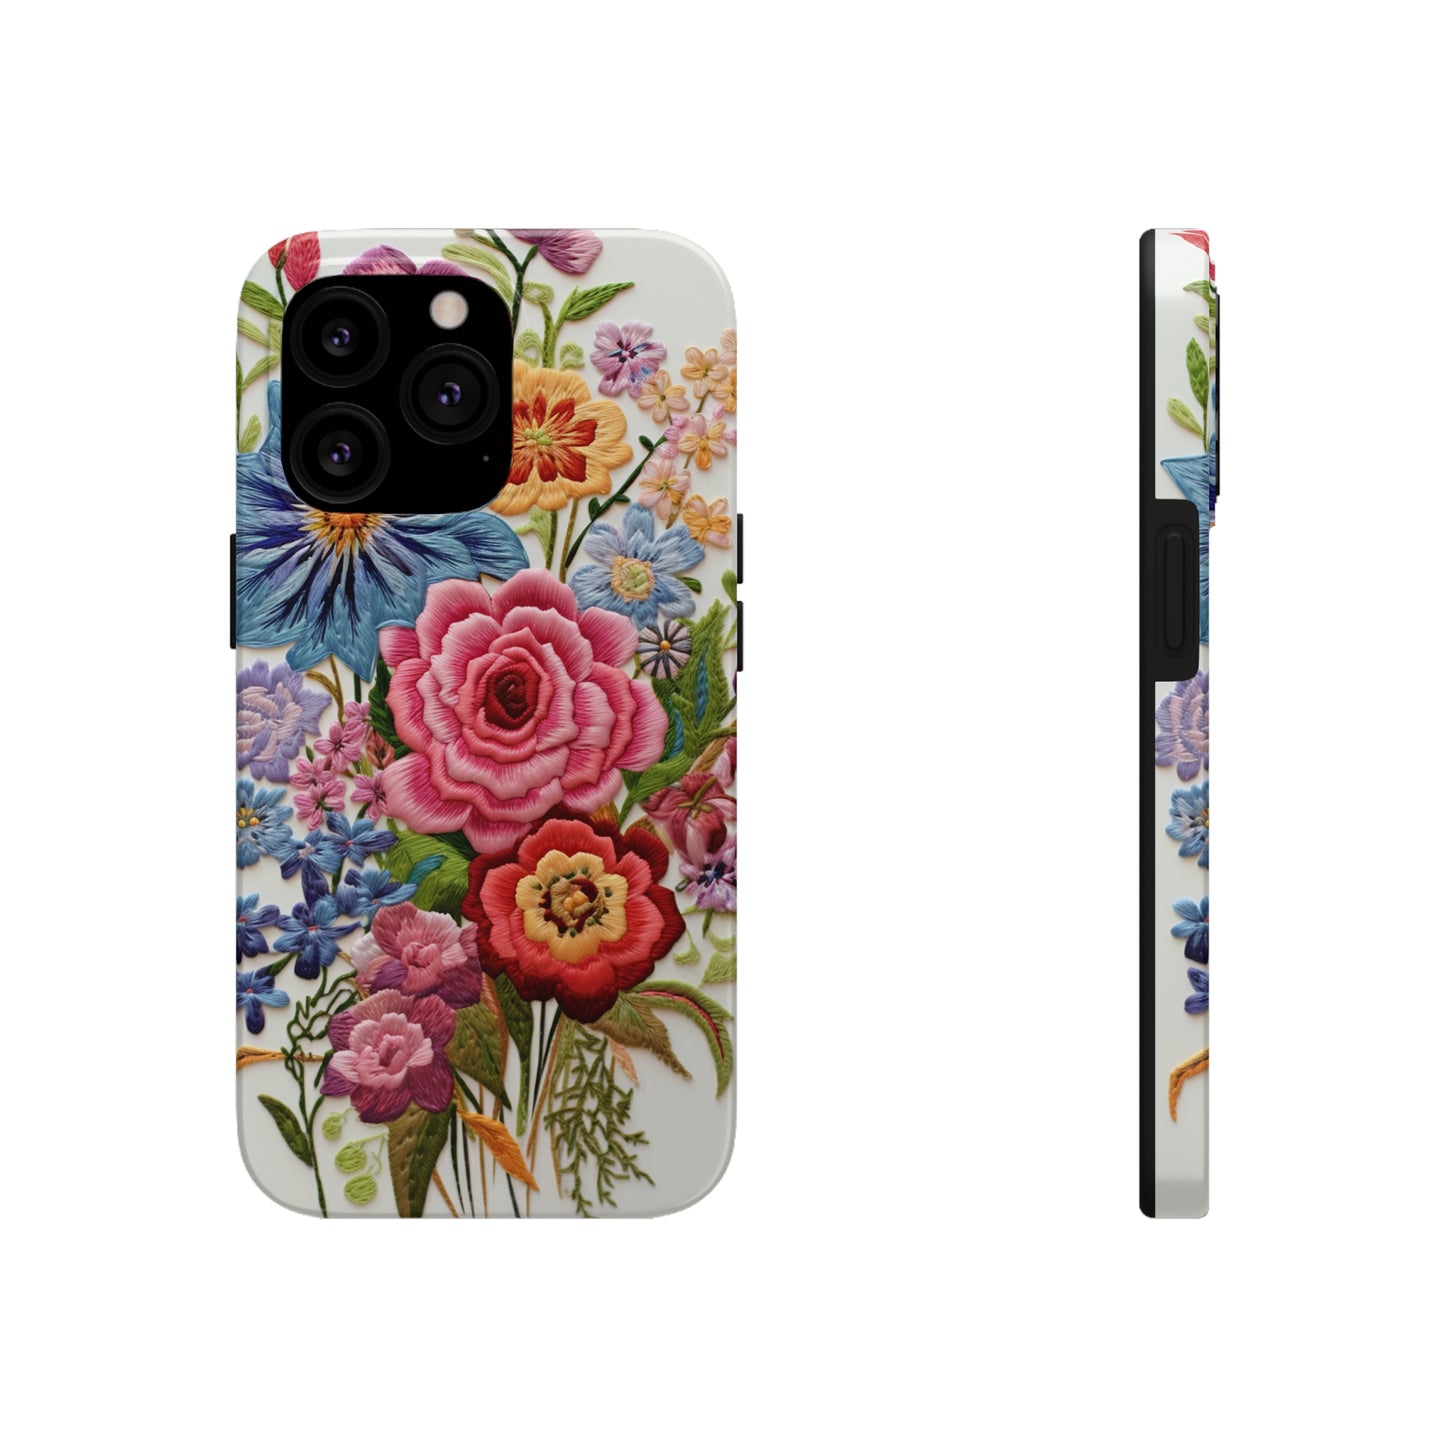 Embroidery Style Floral Aesthetic Flowers in Retro Vintage Tough Case iPhone Case